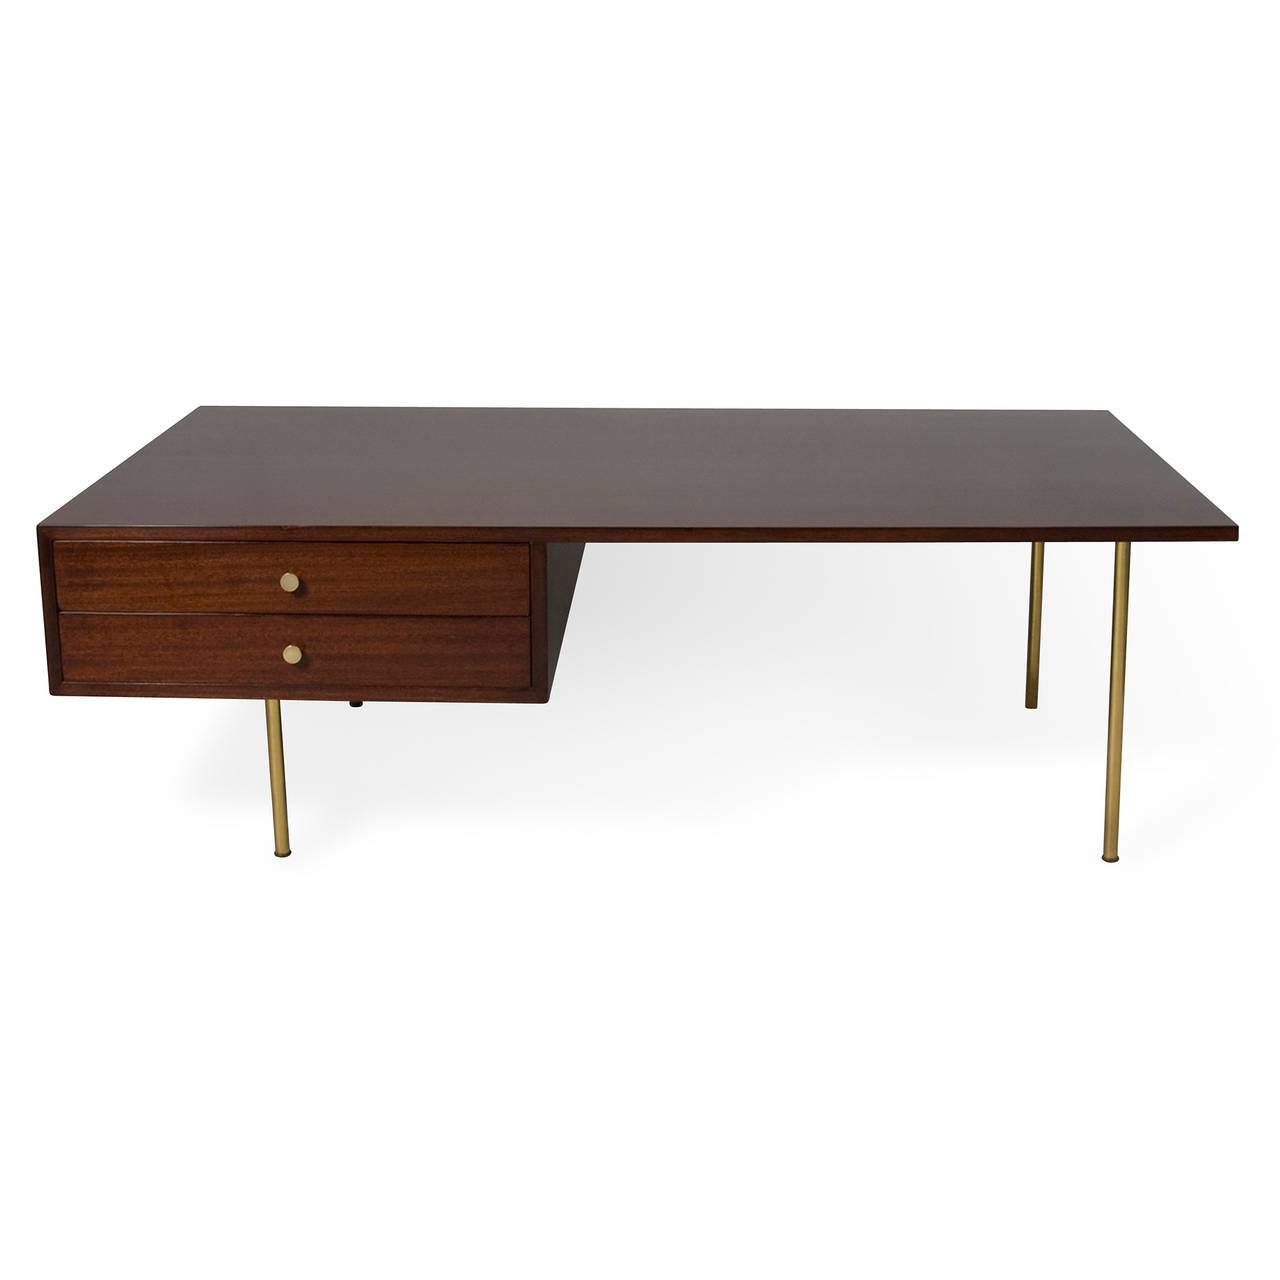 Solid mahogany rectangular coffee table, with two offset drawers having brass pulls, raised on four brass legs. Finished on all four sides. By Harvey Probber, American, 1950s. Measures: 56 in x 32 in, height 18 in.